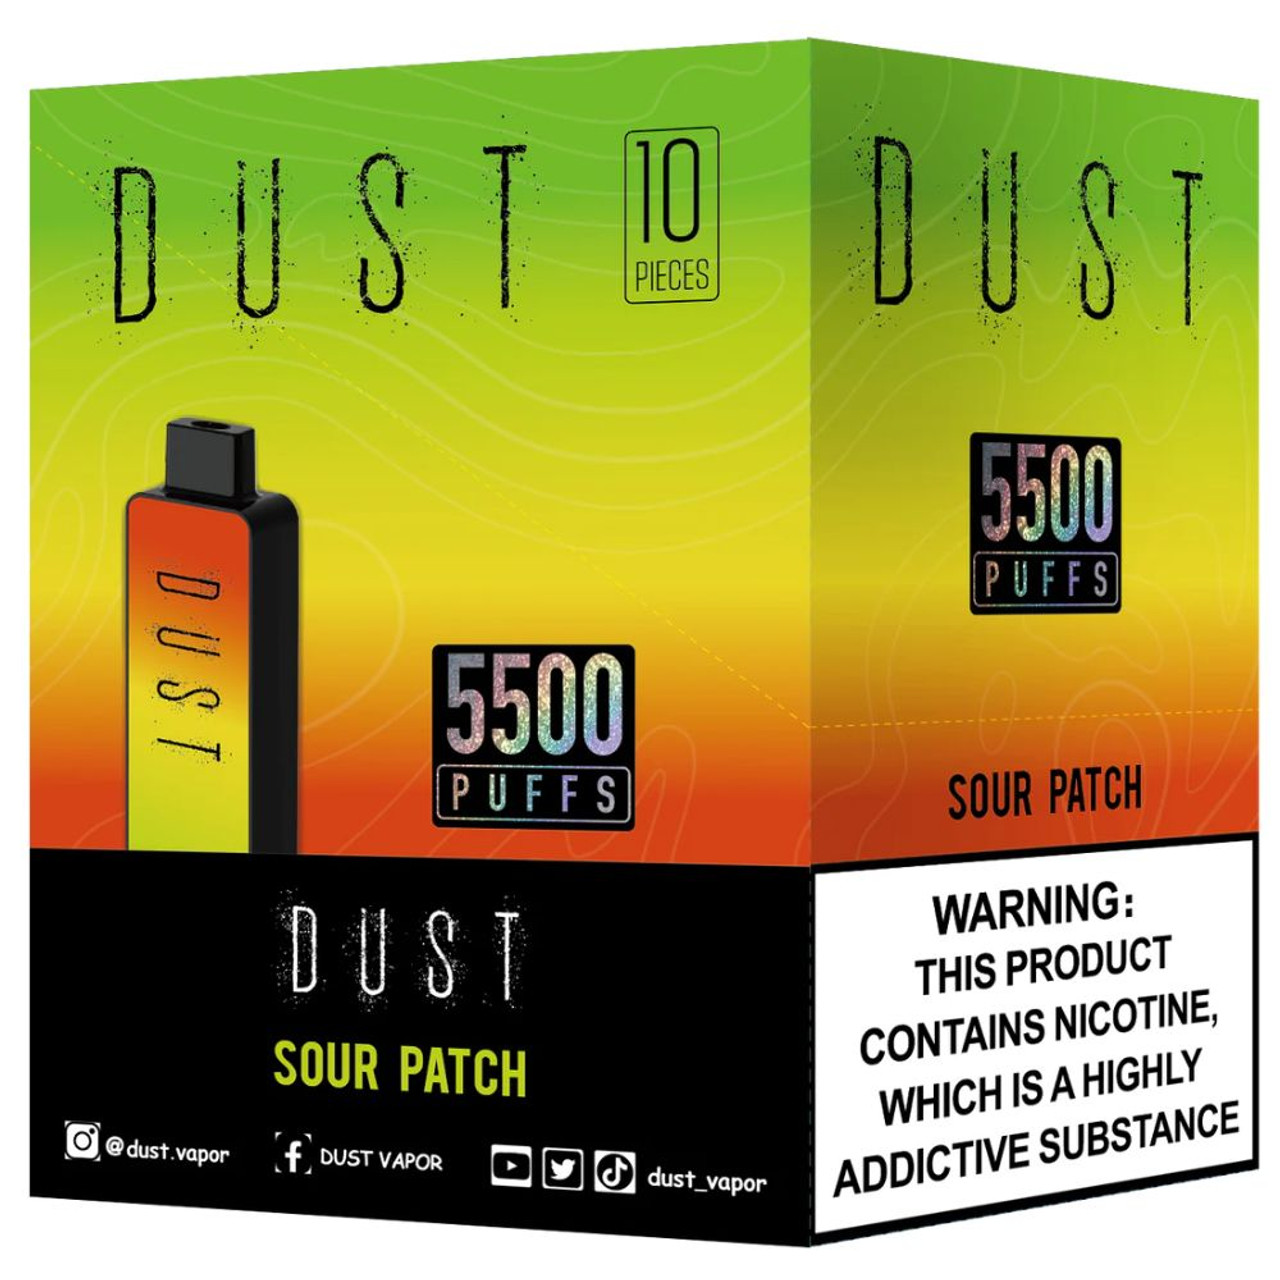 Dust 5500 Puff Disposable Vape - Sour Patch - 10 ct. Display